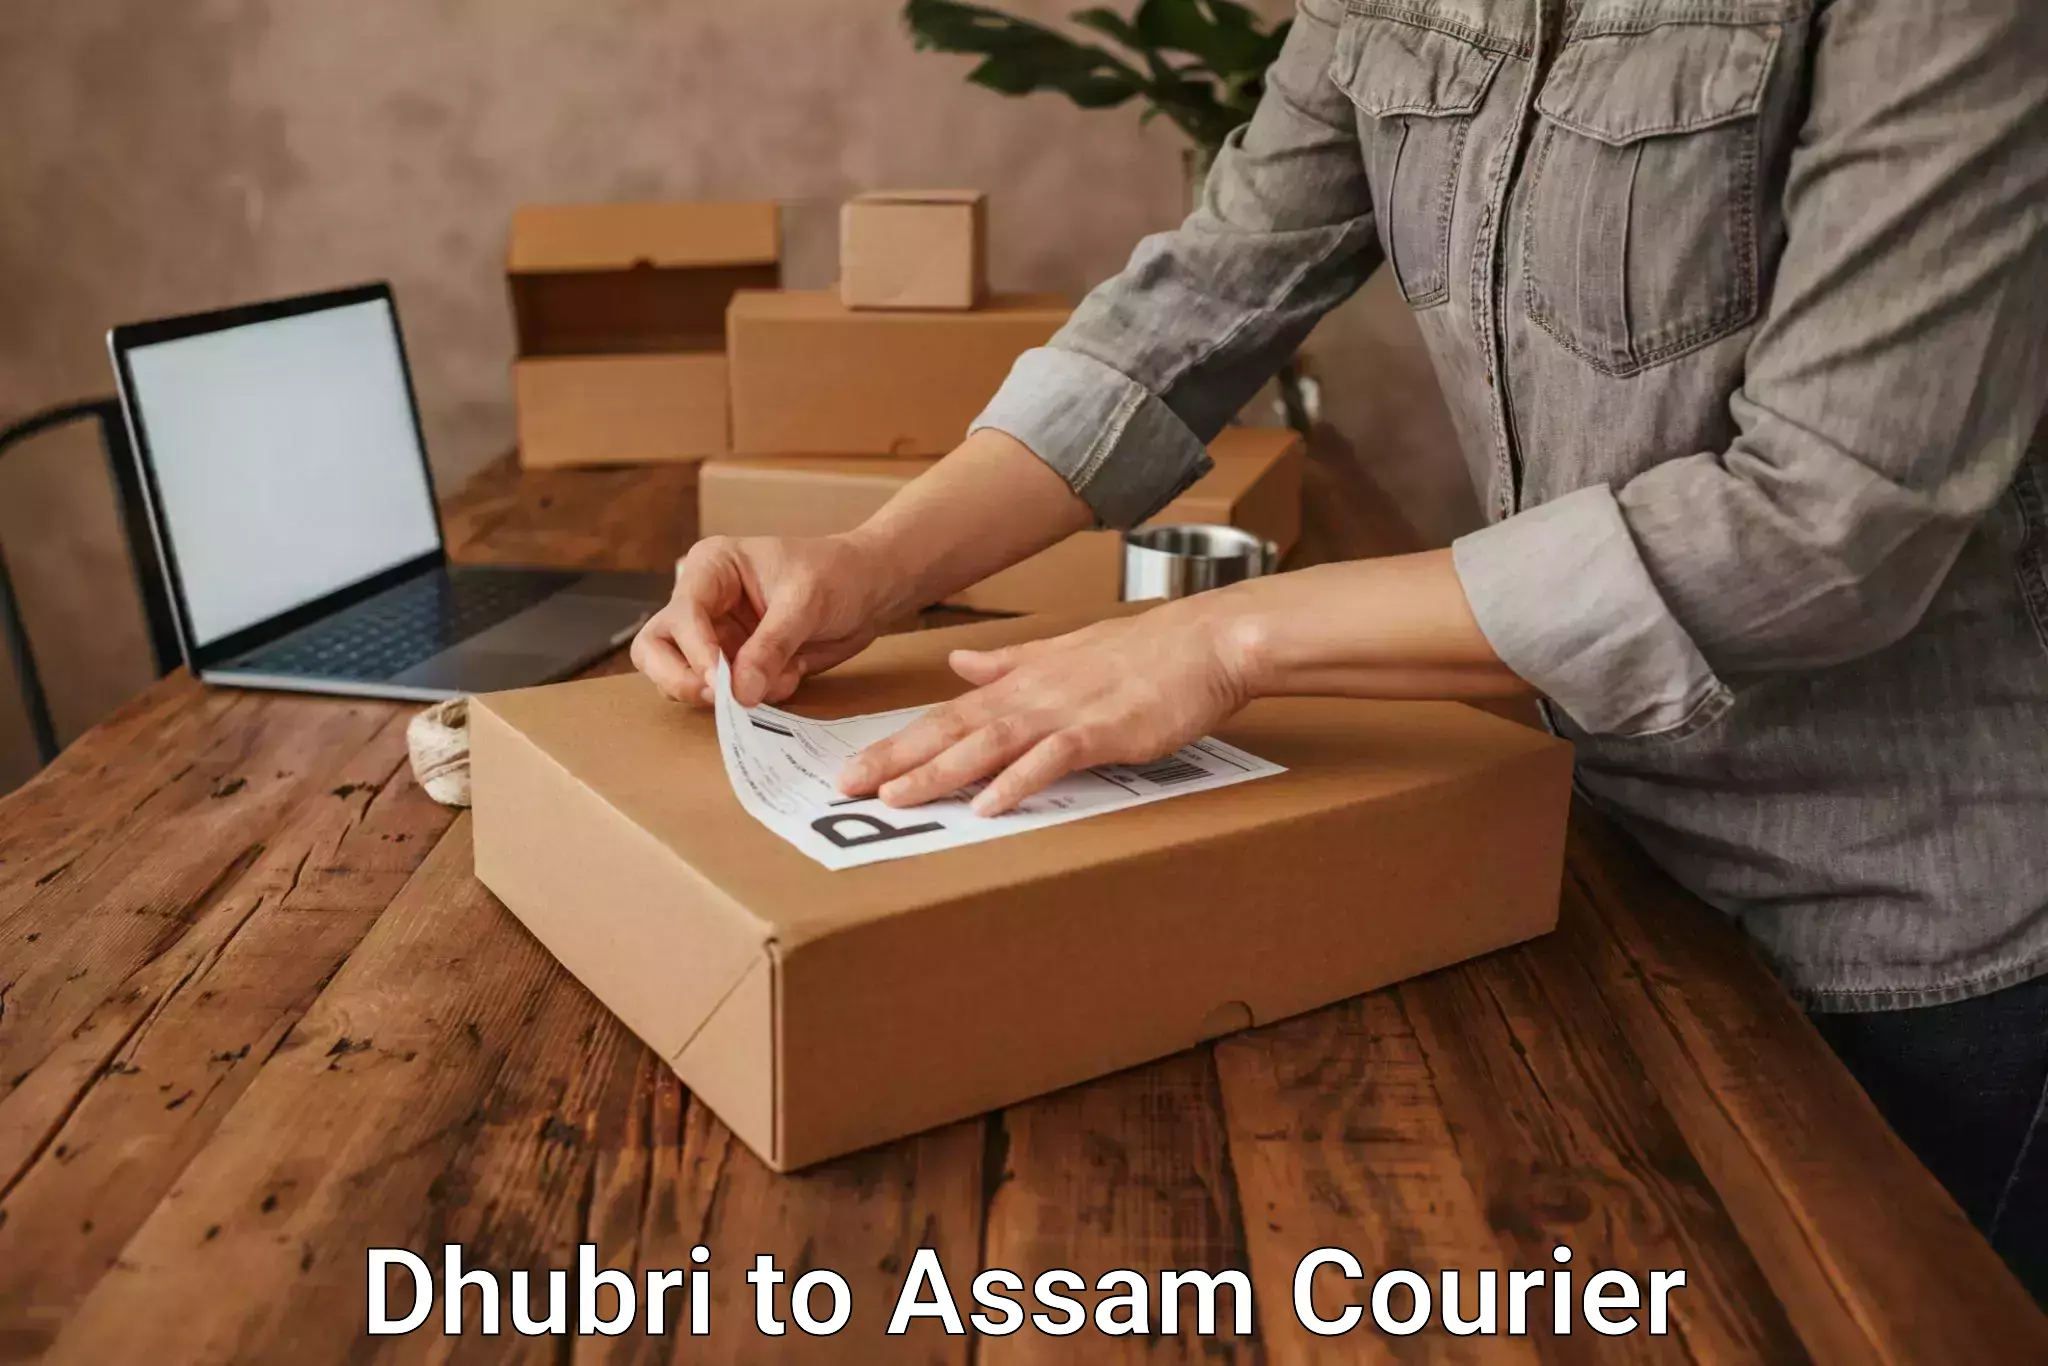 Premium courier services Dhubri to Kamrup